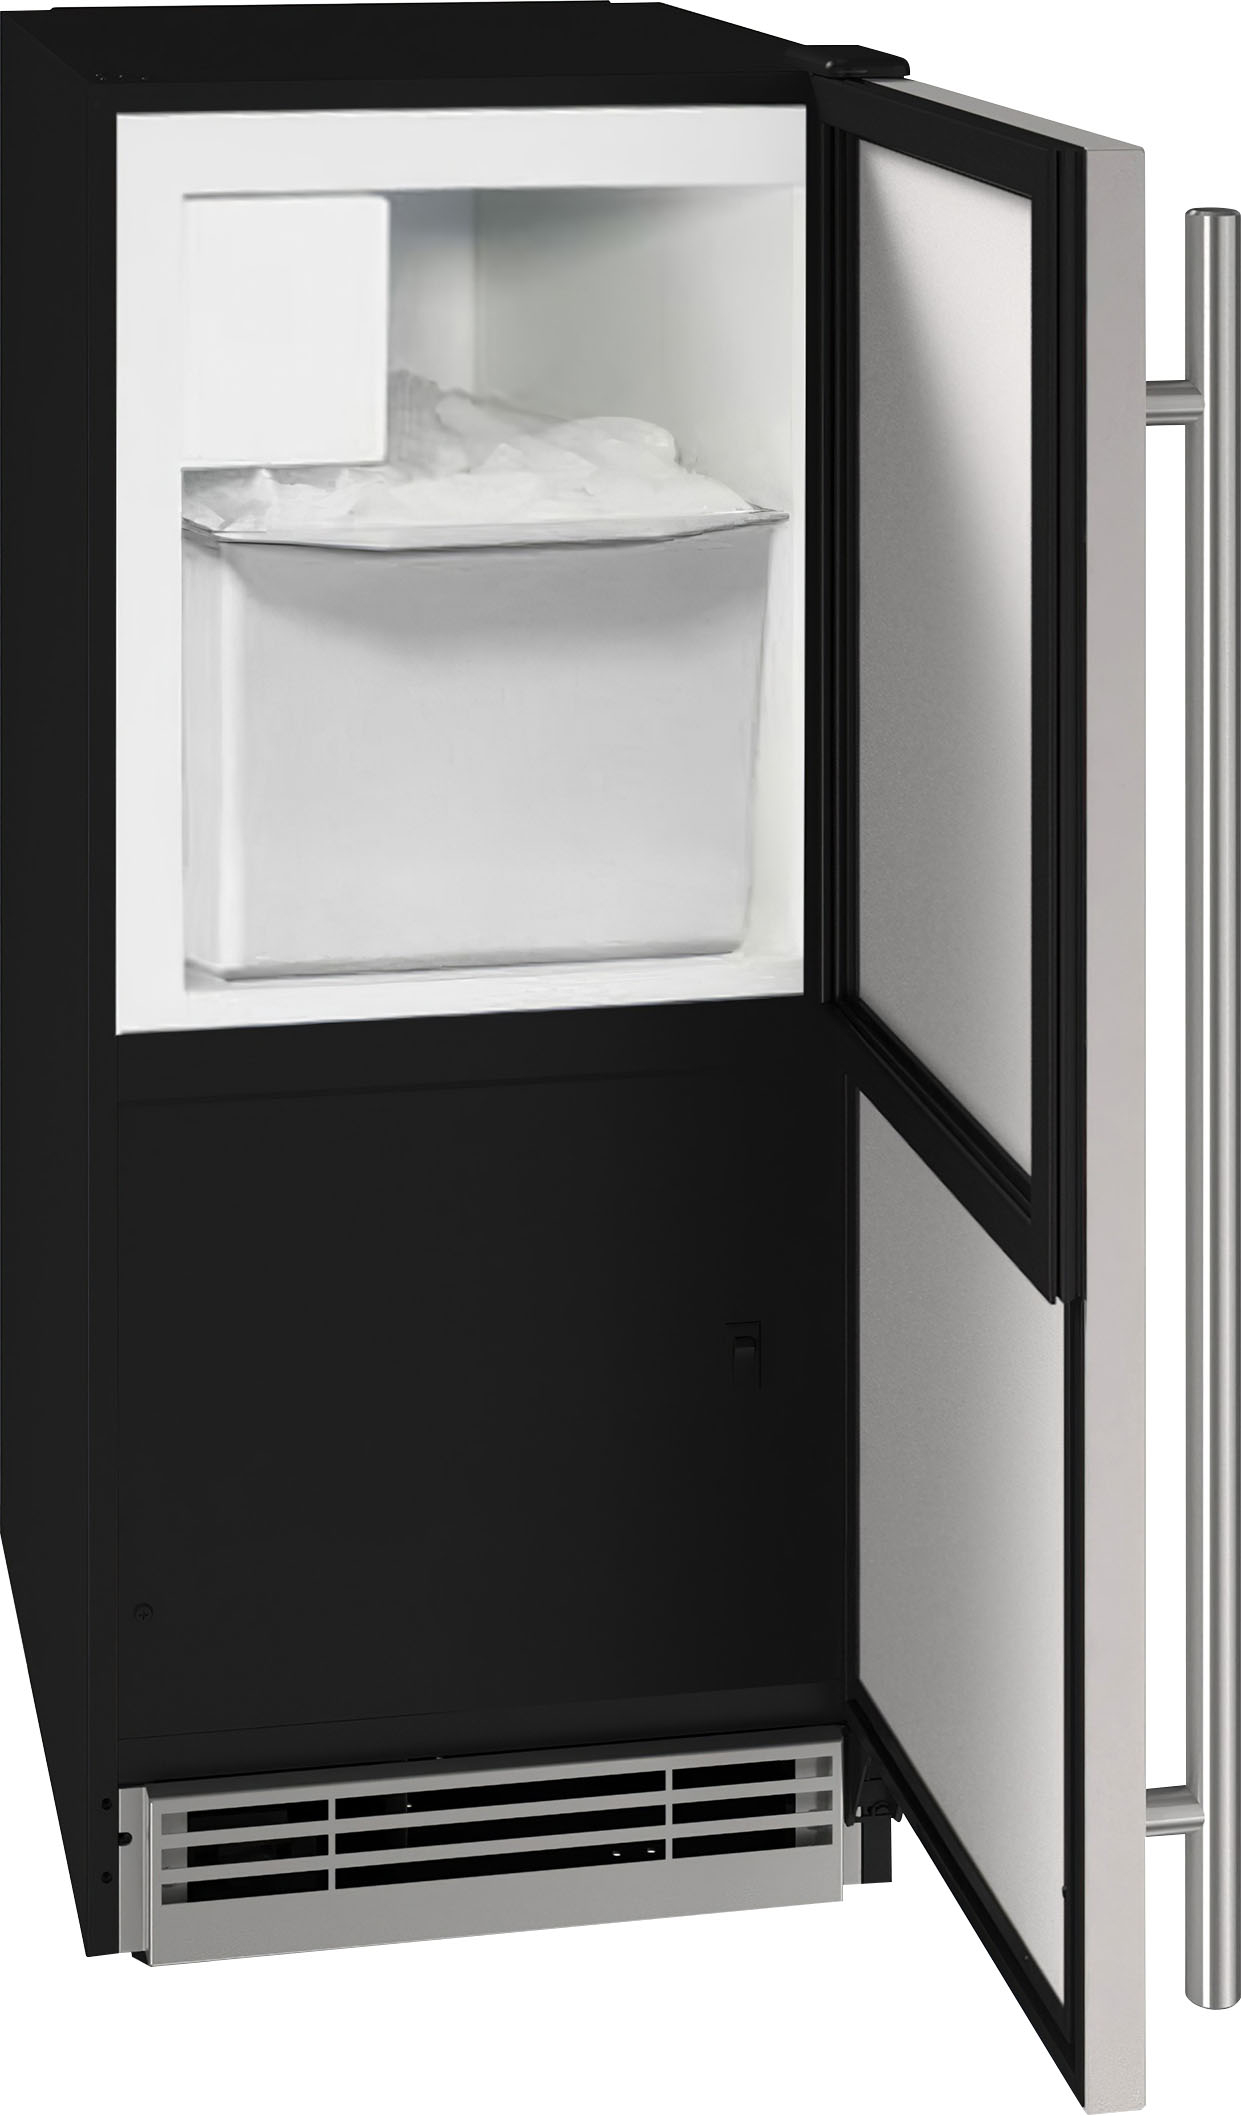 Angle View: U-Line - 15" 25-lb Freestanding Icemaker - Stainless Steel Solid